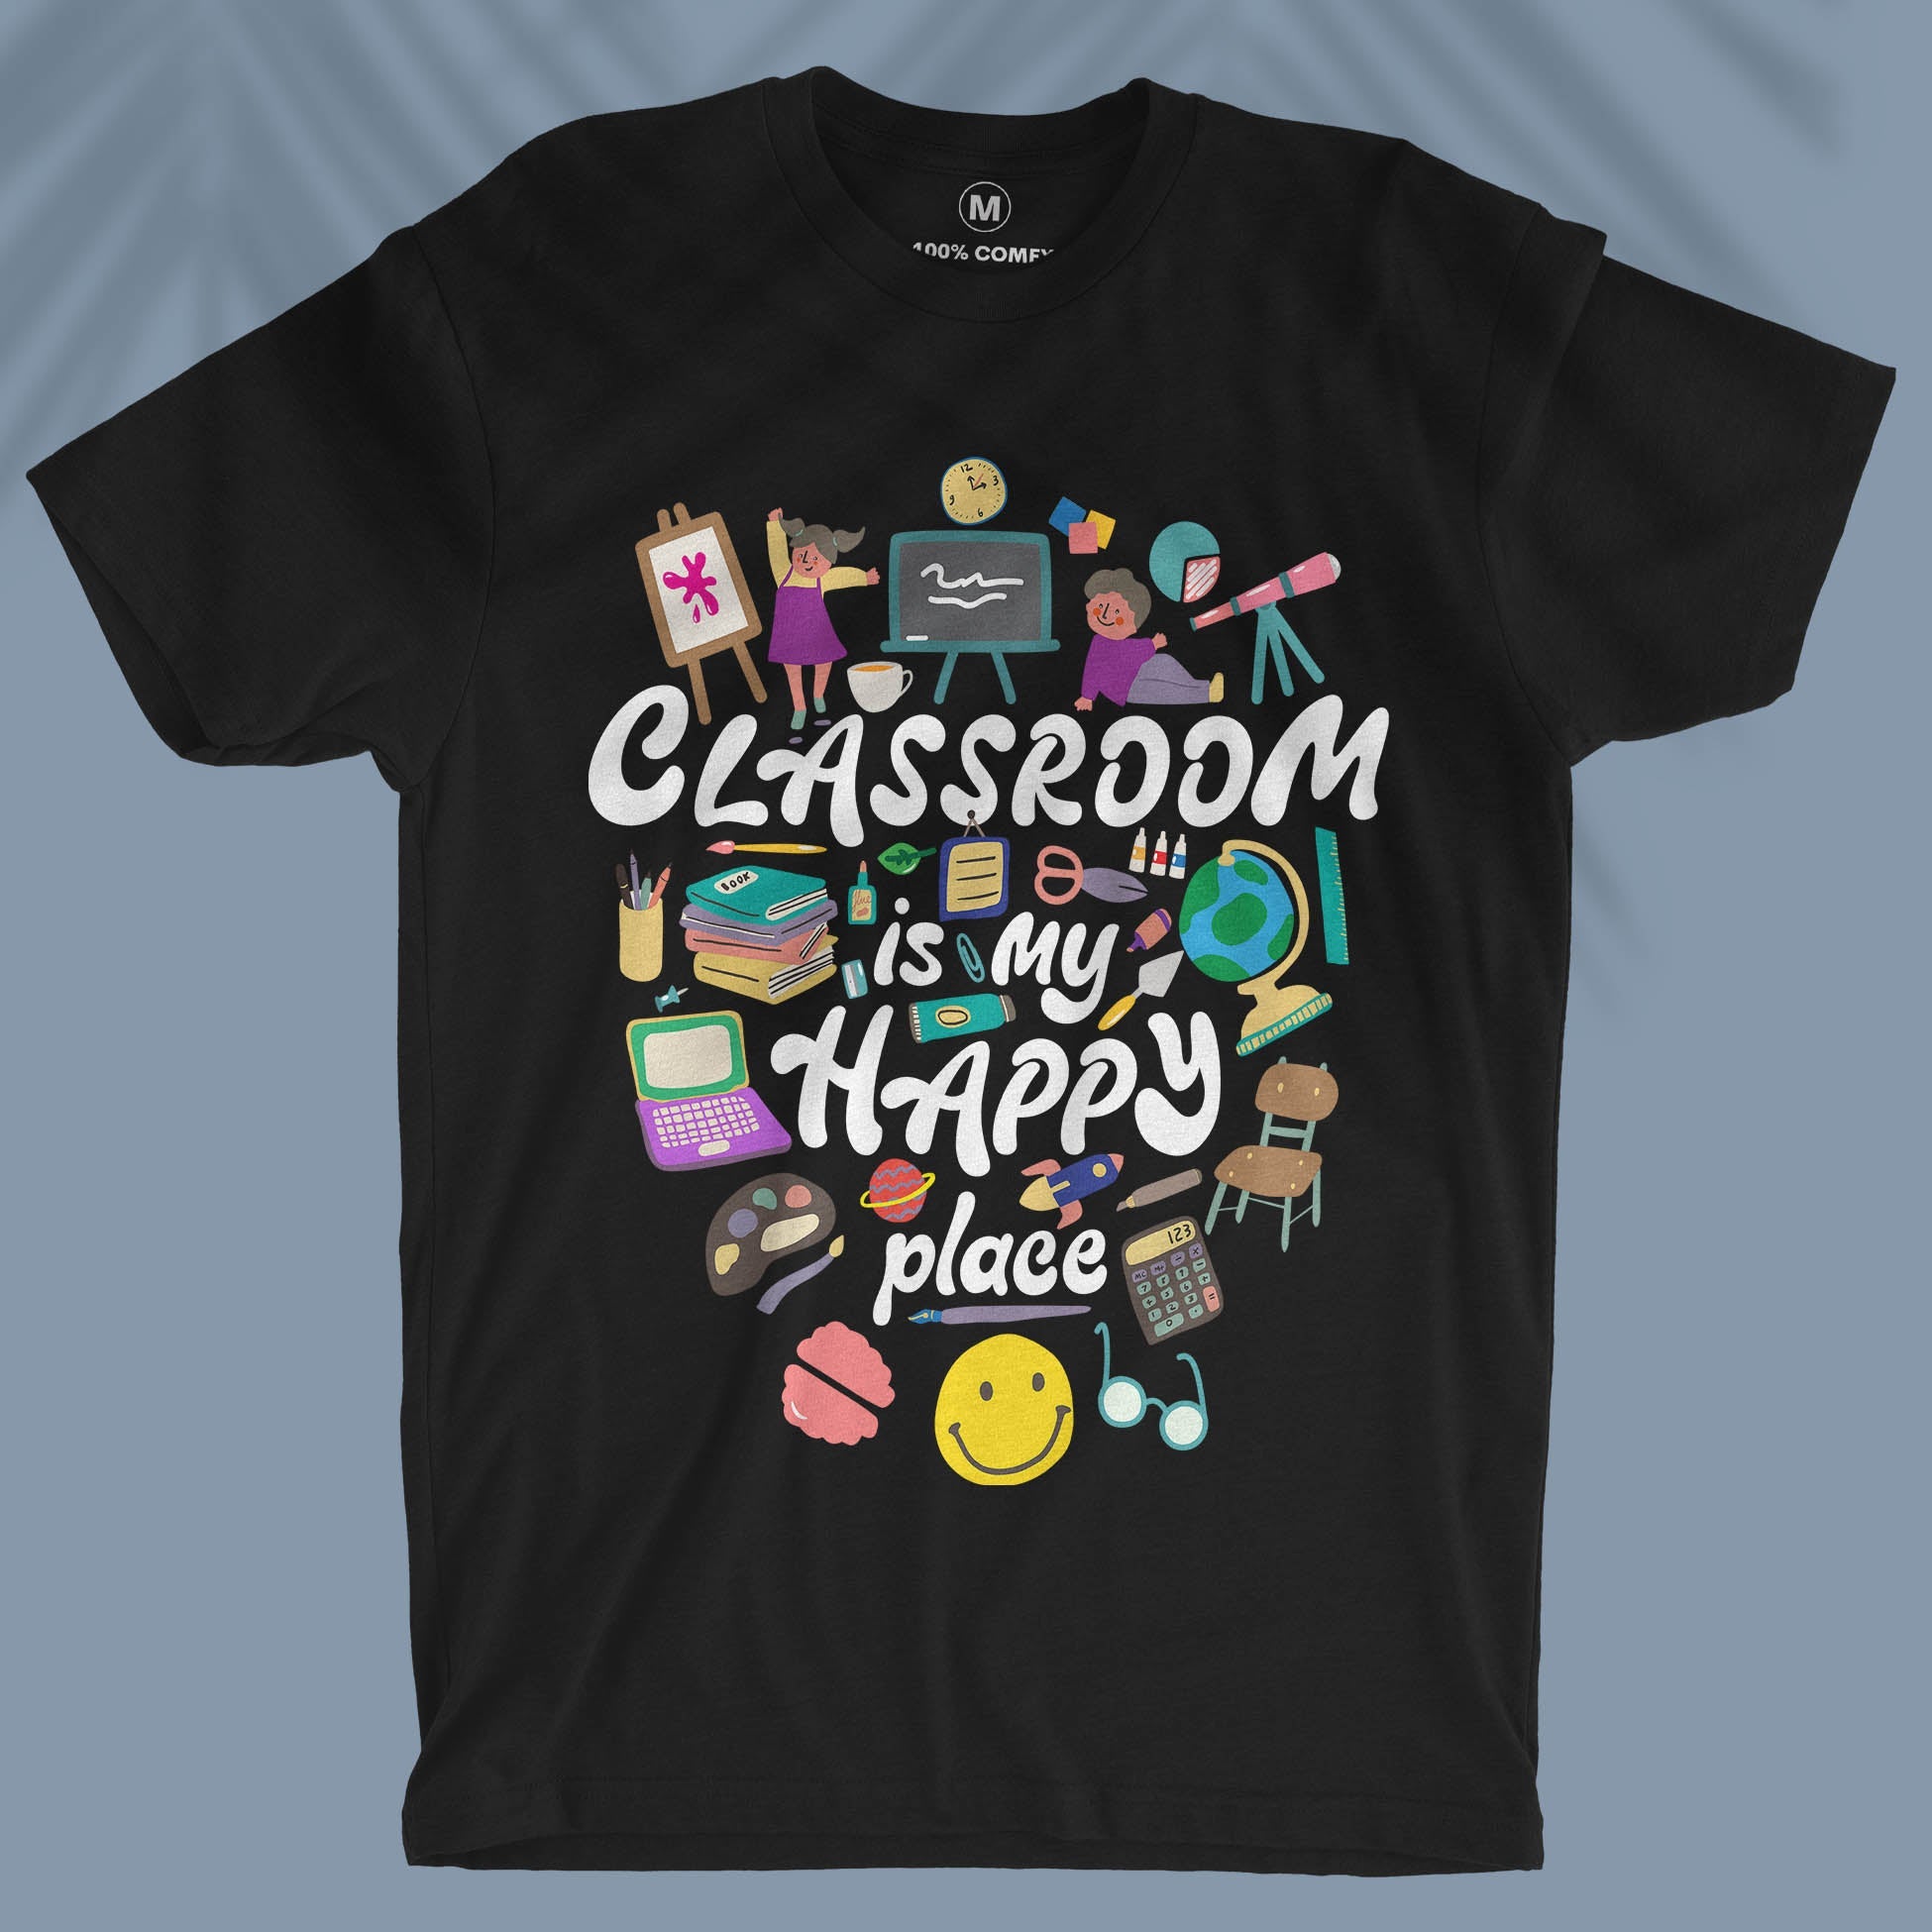 Classroom Is My Happy Place - Unisex T-shirt